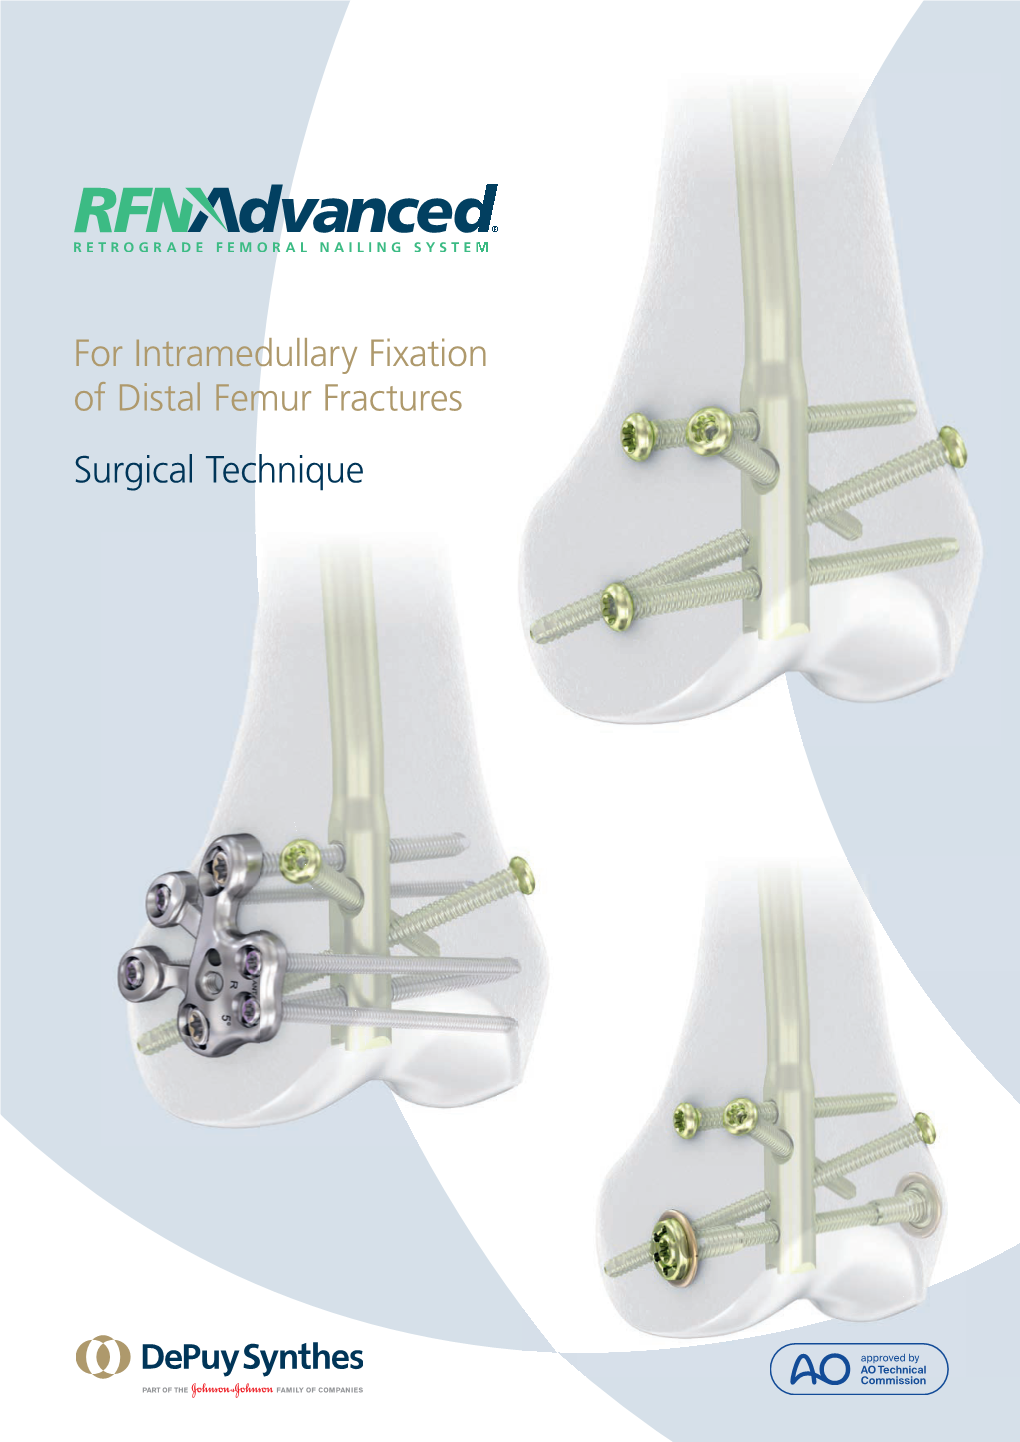 For Intramedullary Fixation of Distal Femur Fractures Surgical Technique Image Intensiﬁer Control